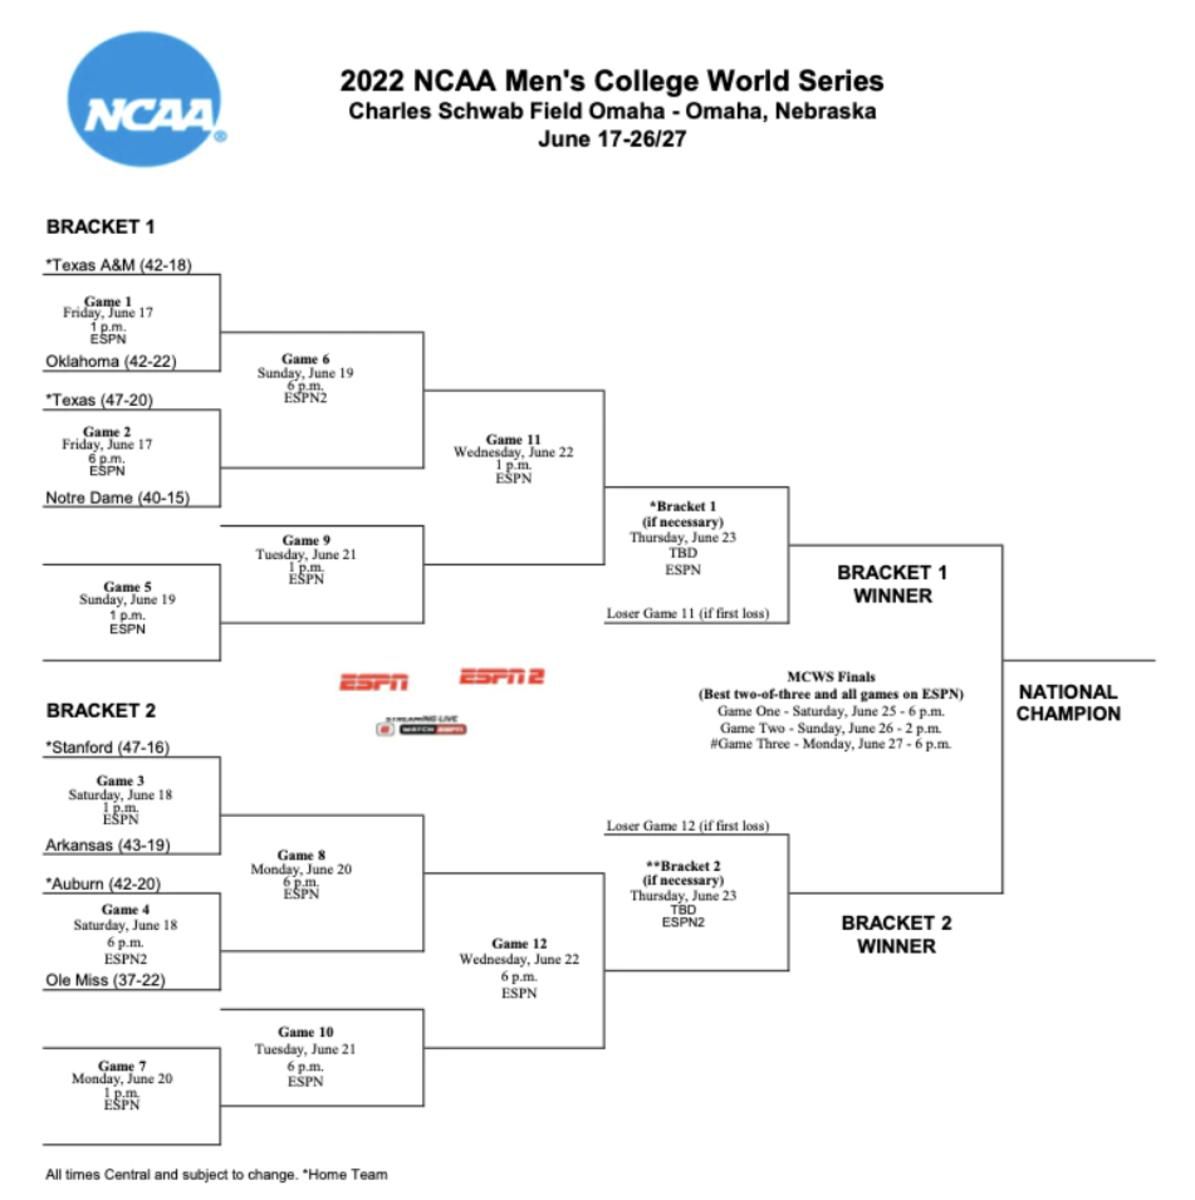 2022 College World Series bracket (all times Central)